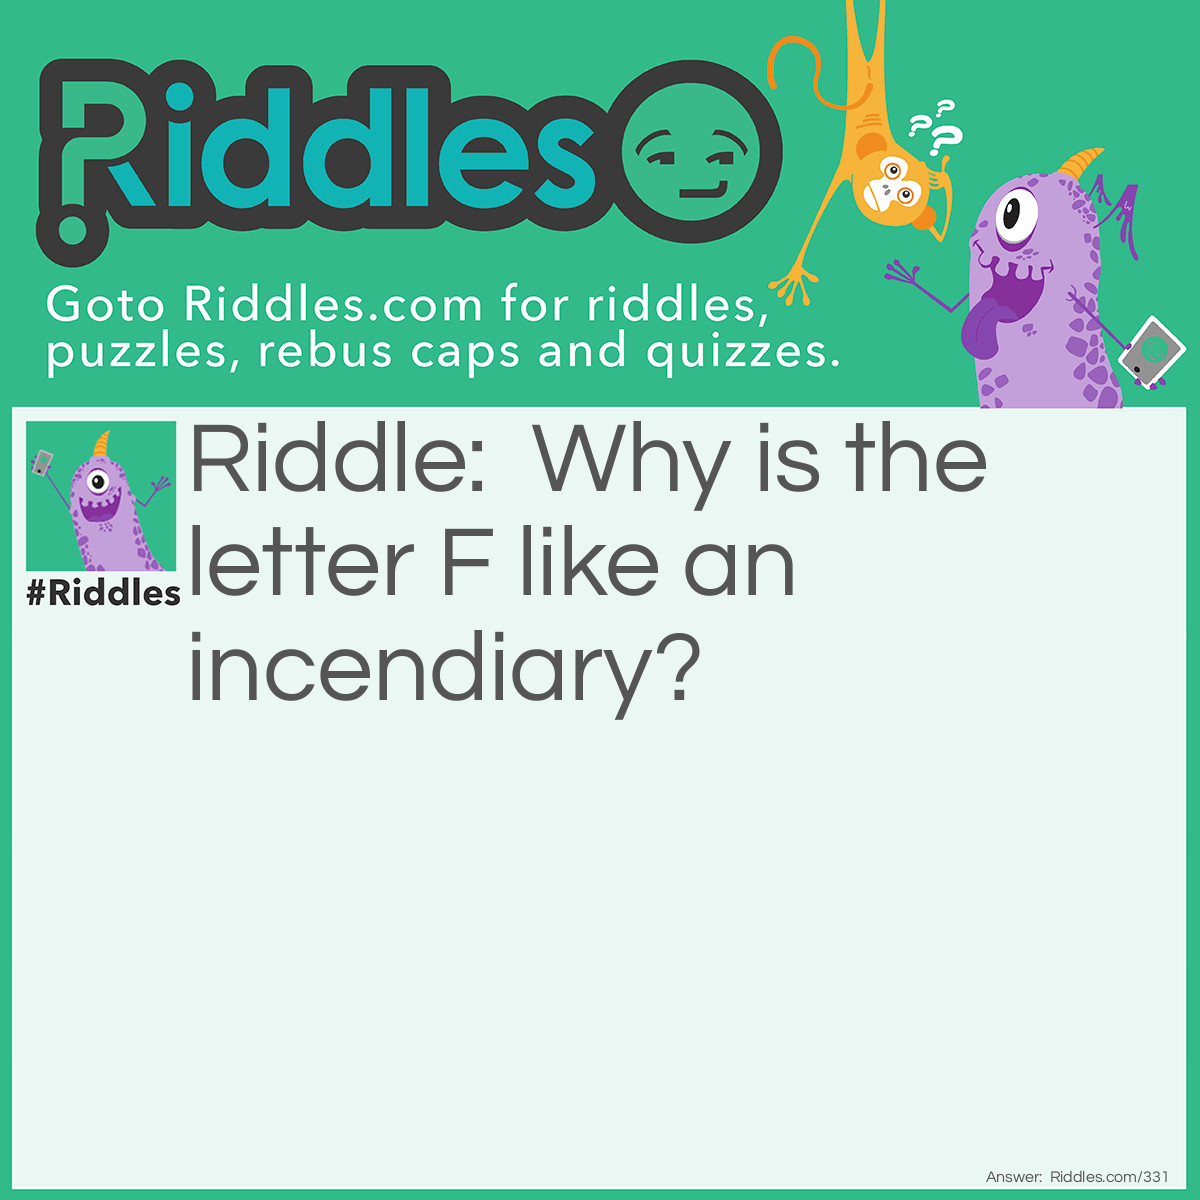 Riddle: Why is the letter F like an incendiary? Answer: Because it makes ire fire.